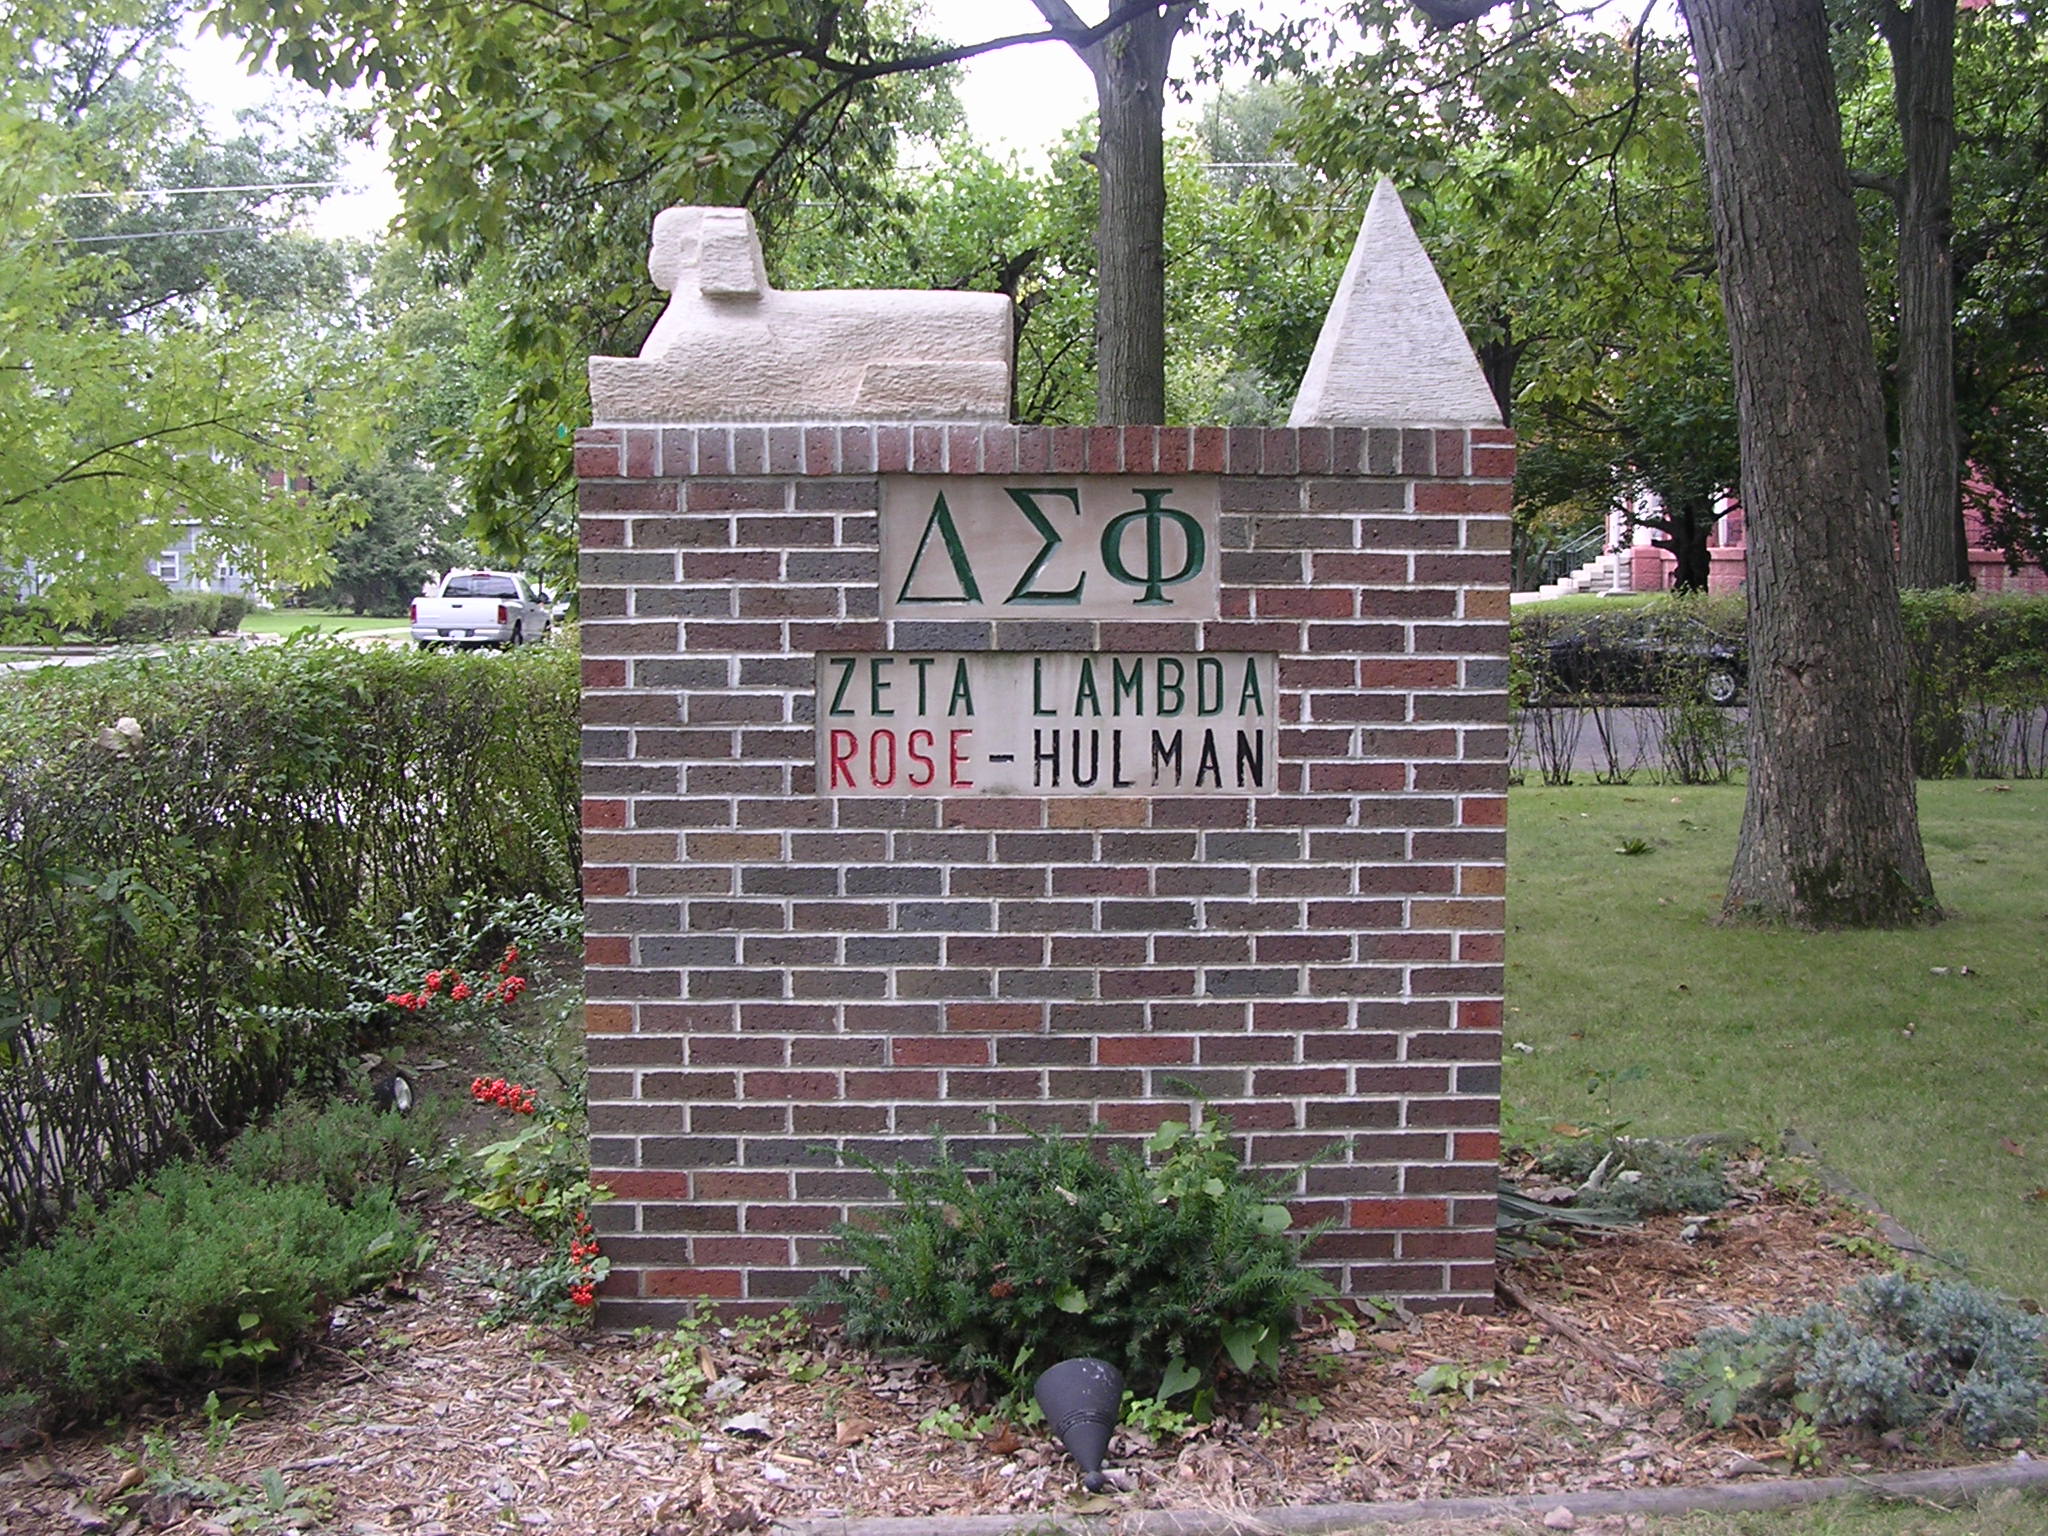 Chapter Sign created by Wayne Harshberger. October 2003